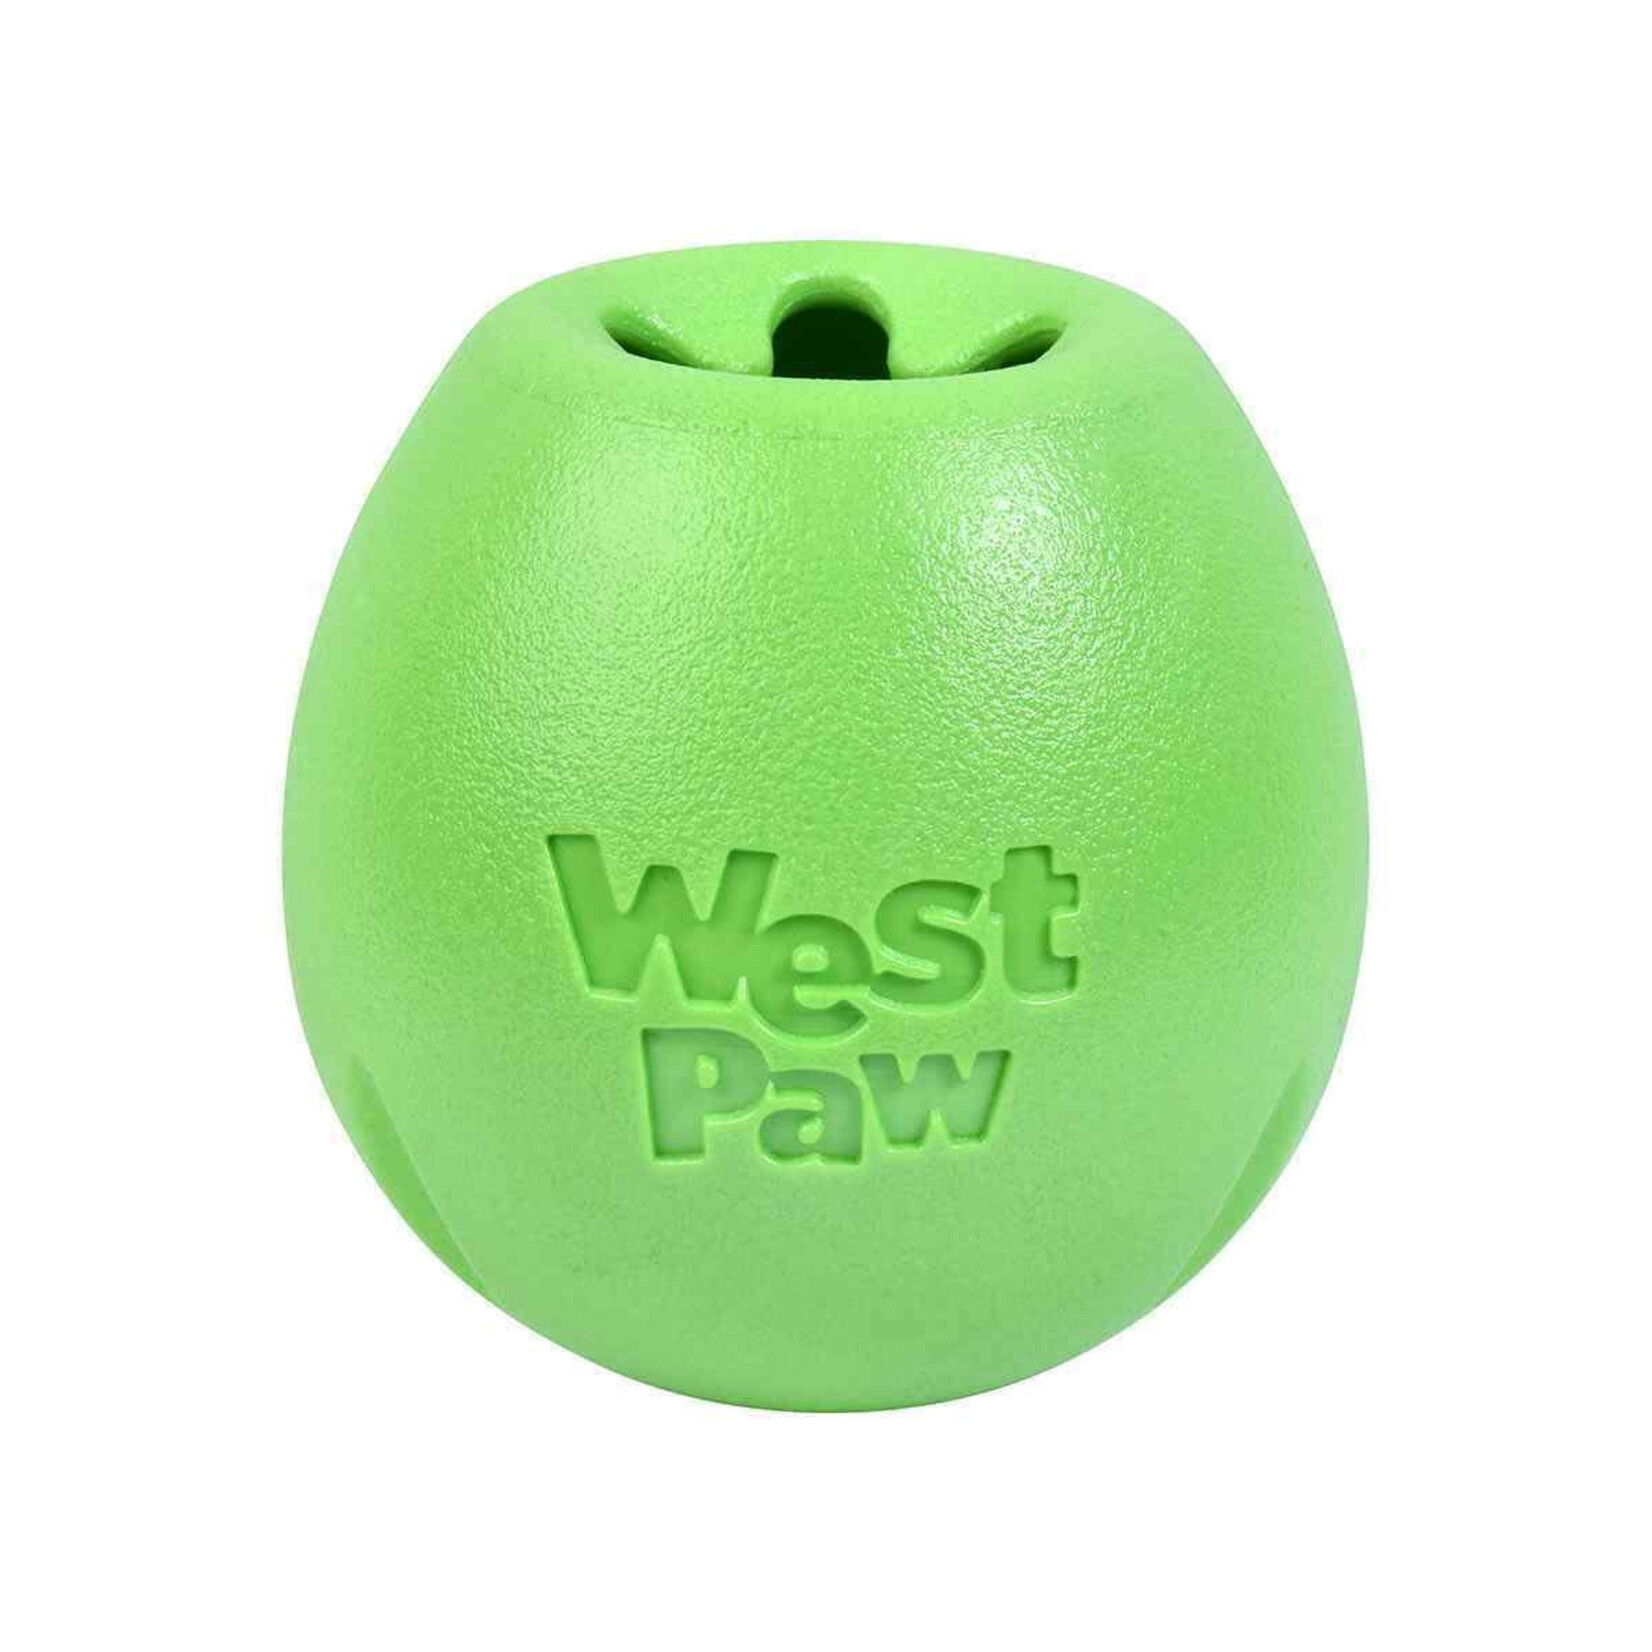 West Paw Rumble large Green